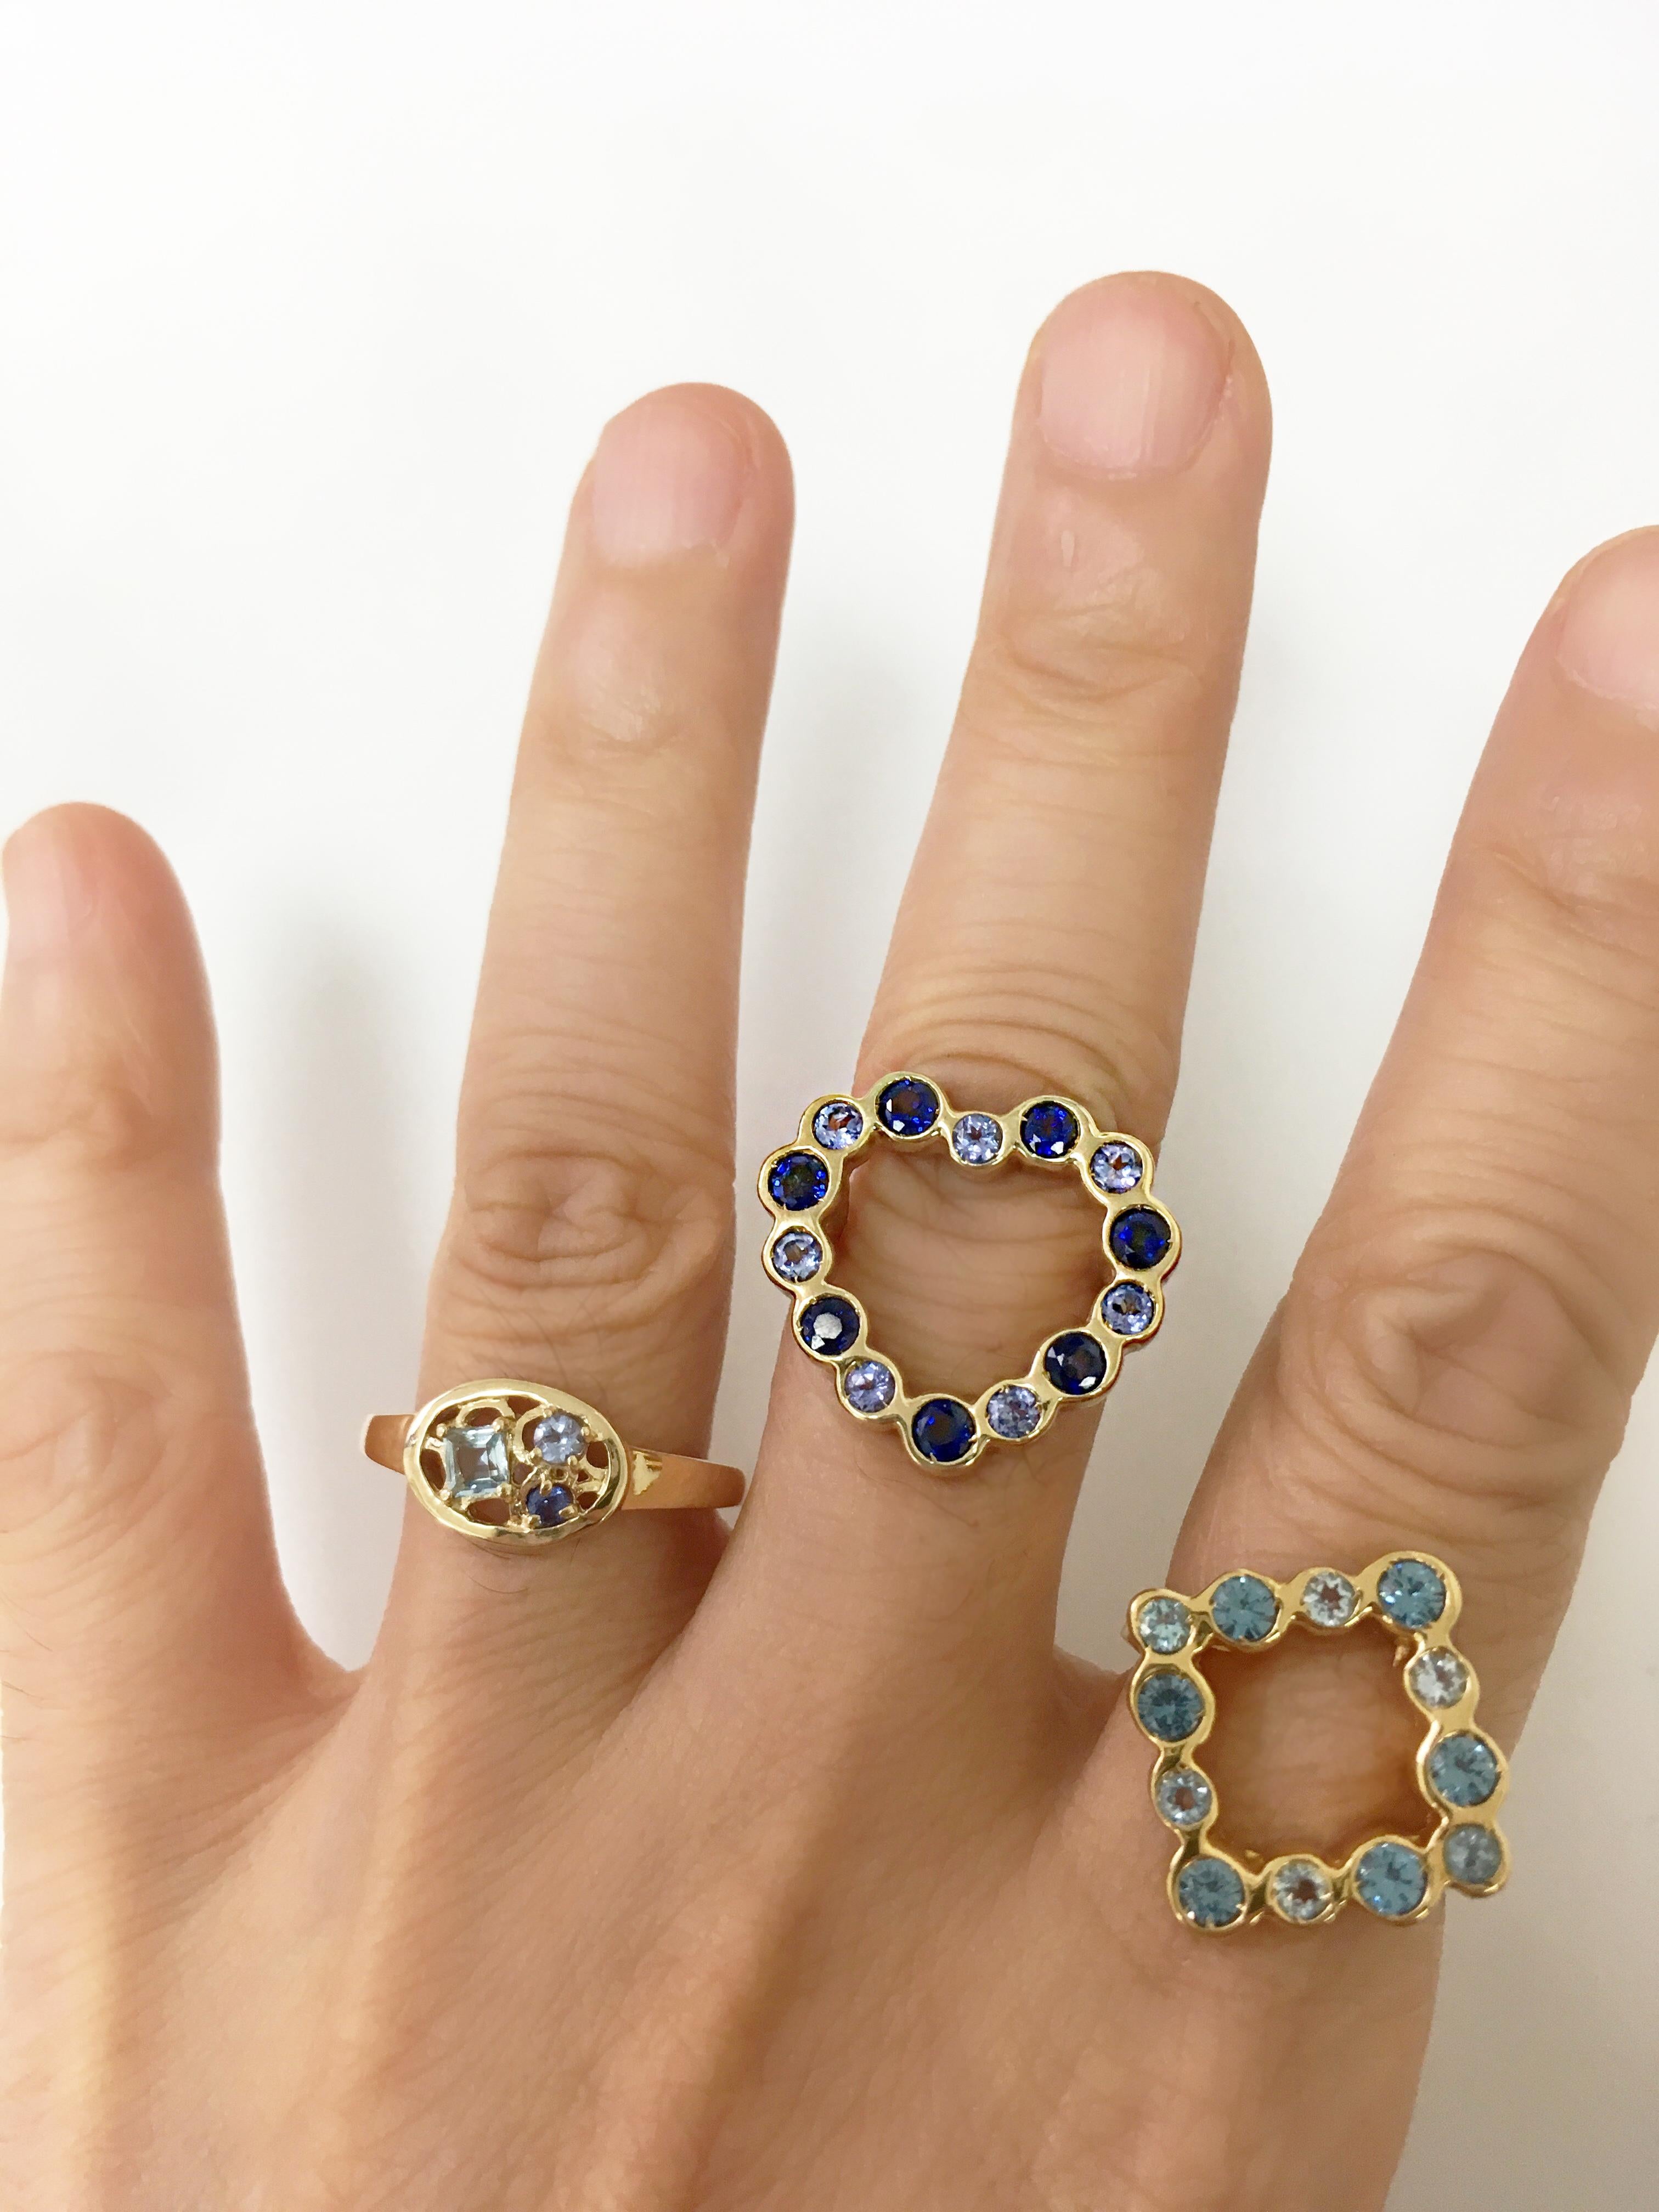 14 karat yellow gold with Tanzanite and Blue Sapphire Heart shape Cocktail Ring (Rundschliff)